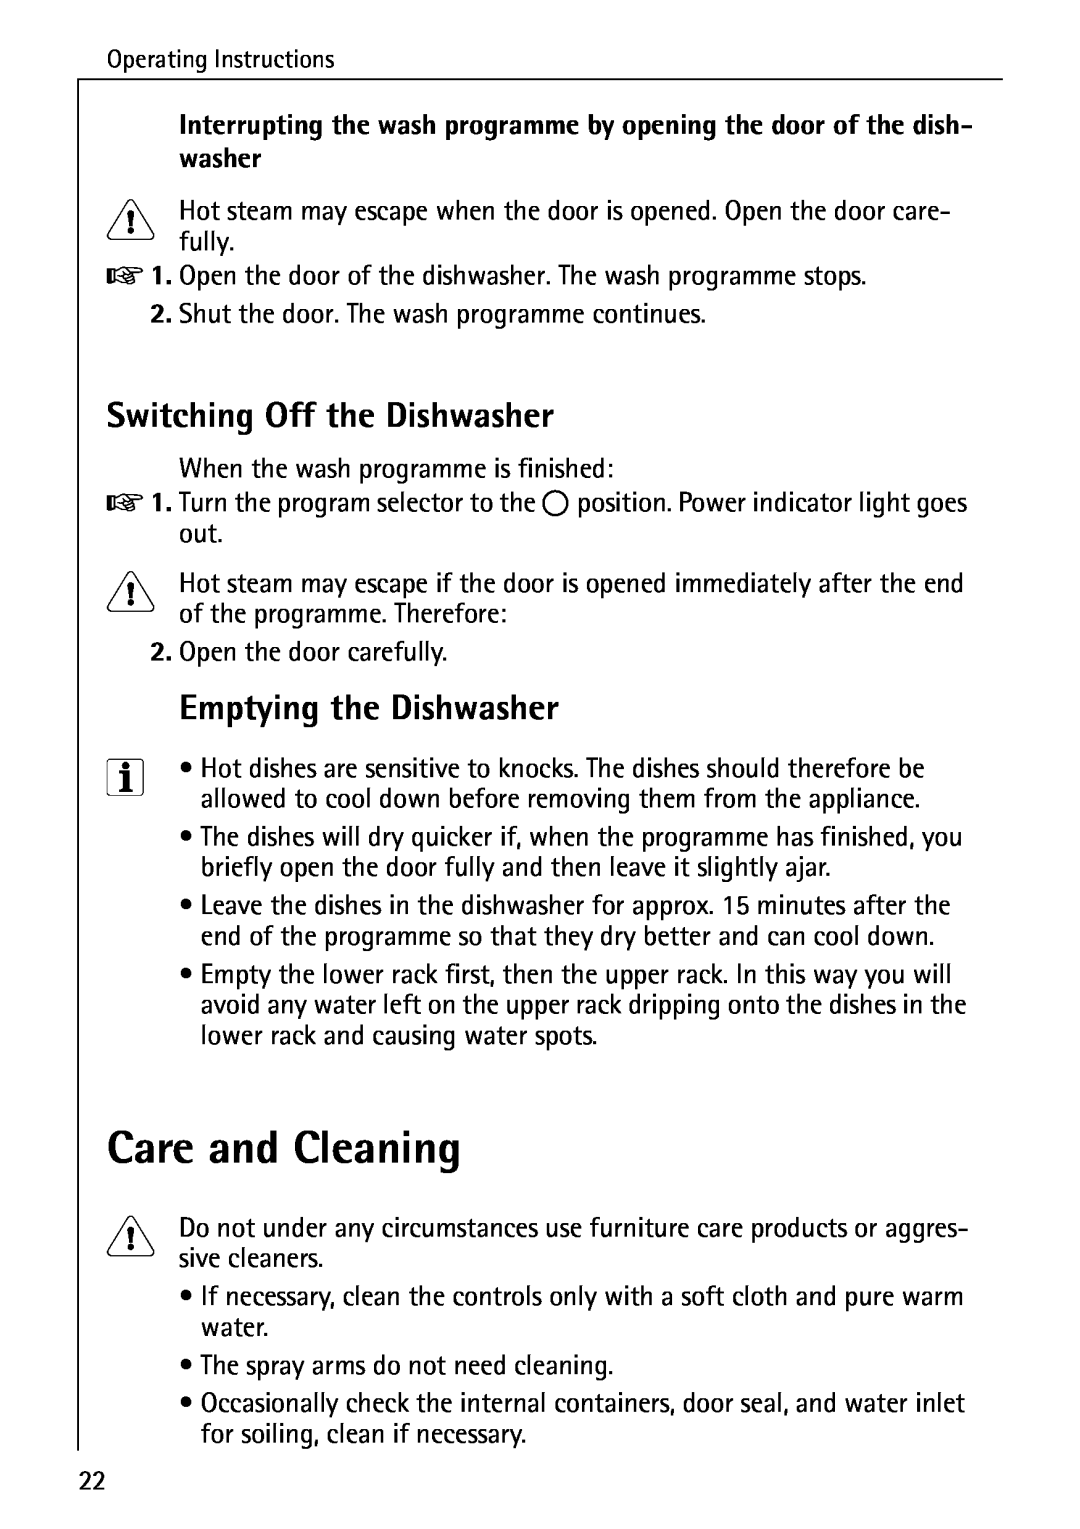 Electrolux 40250 i manual Care and Cleaning, Switching Off the Dishwasher, Emptying the Dishwasher 